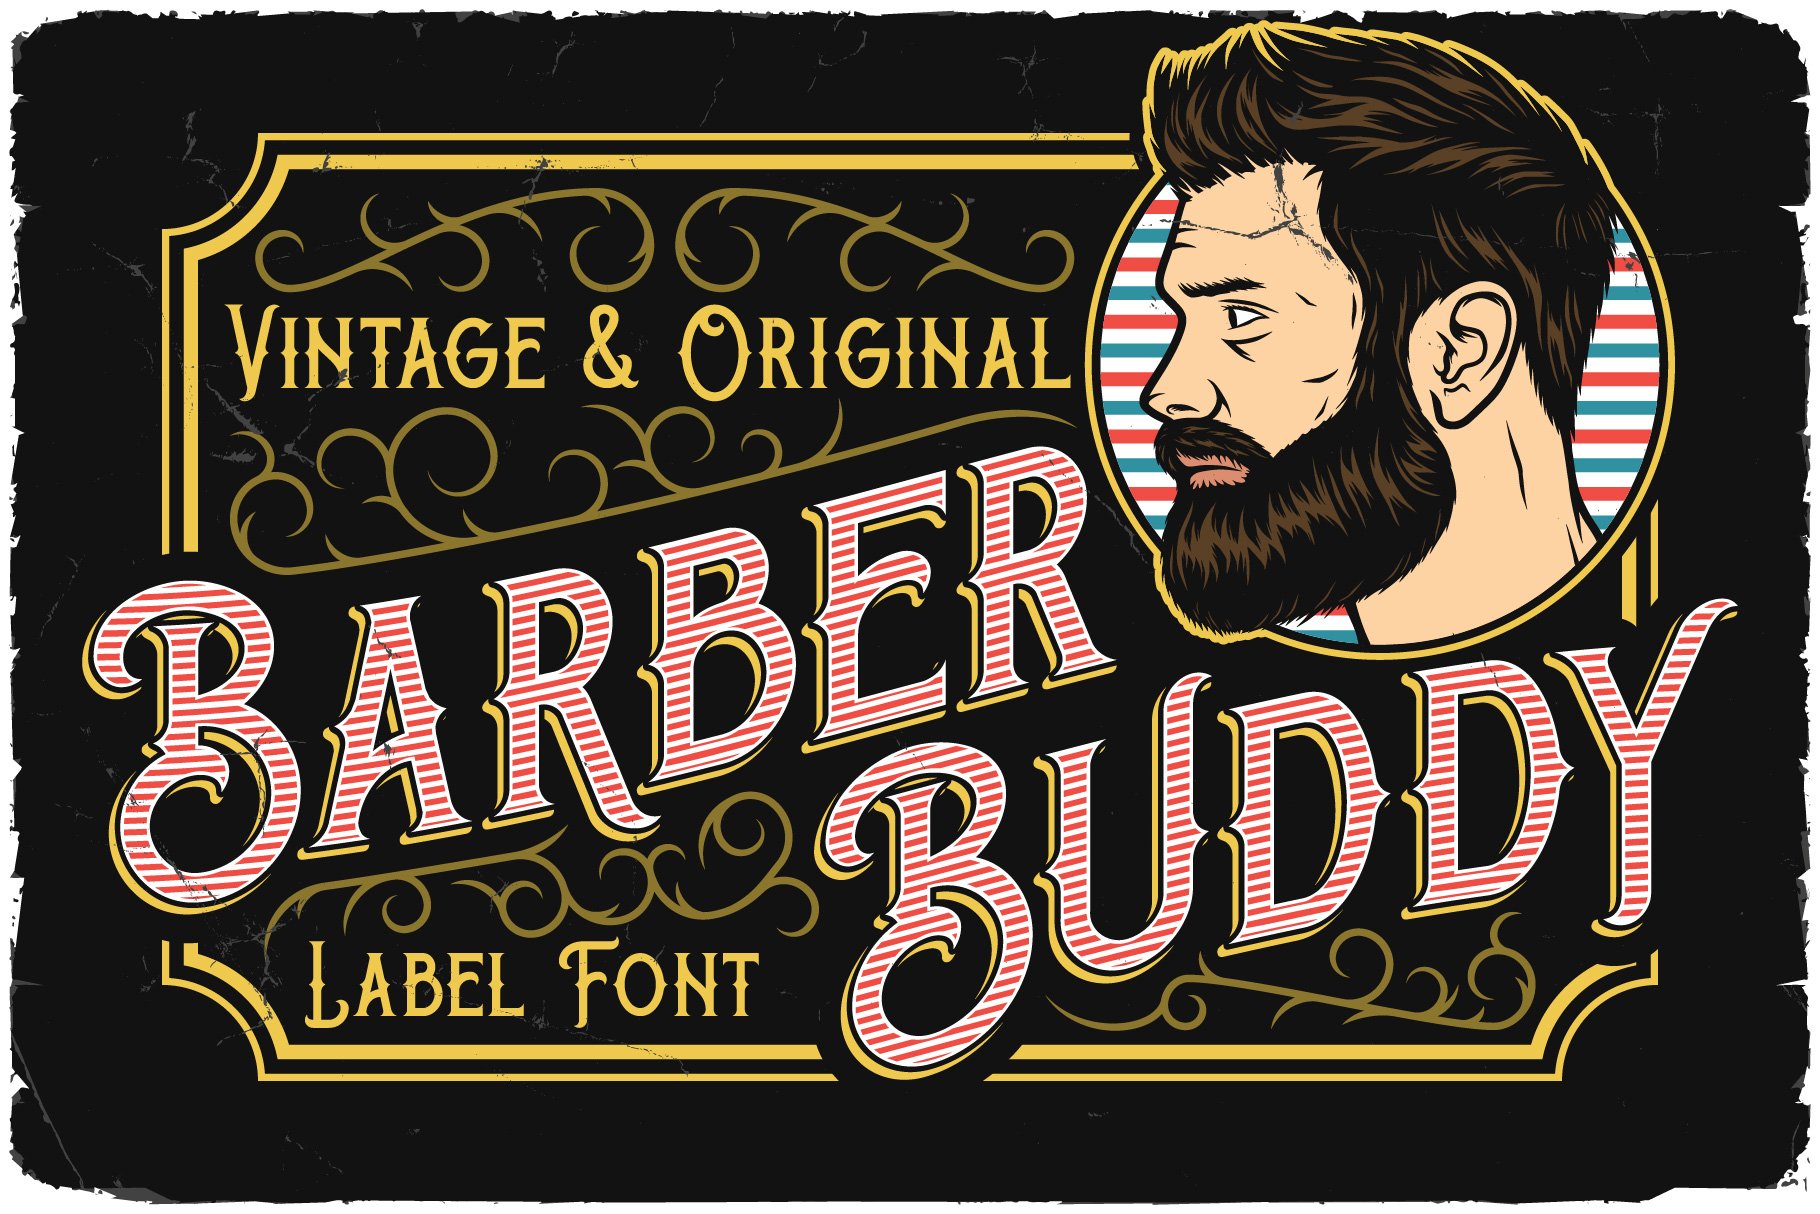 Barber Buddy Layered Font cover image.